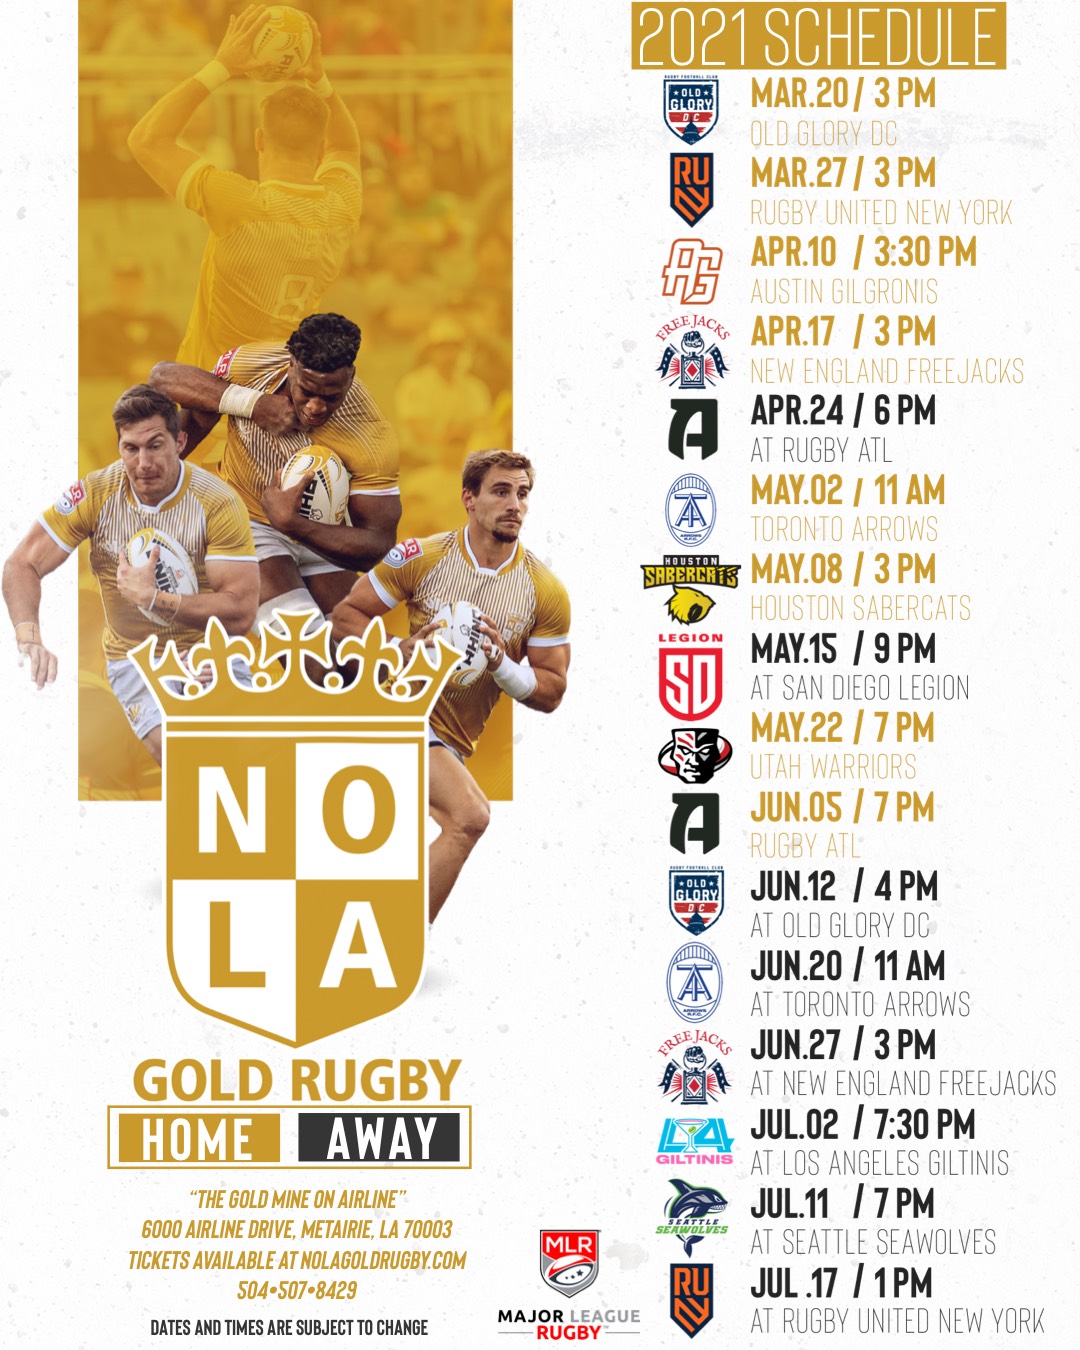 Major League Rugby Updated 2021 Season Schedule NOLA Gold Rugby